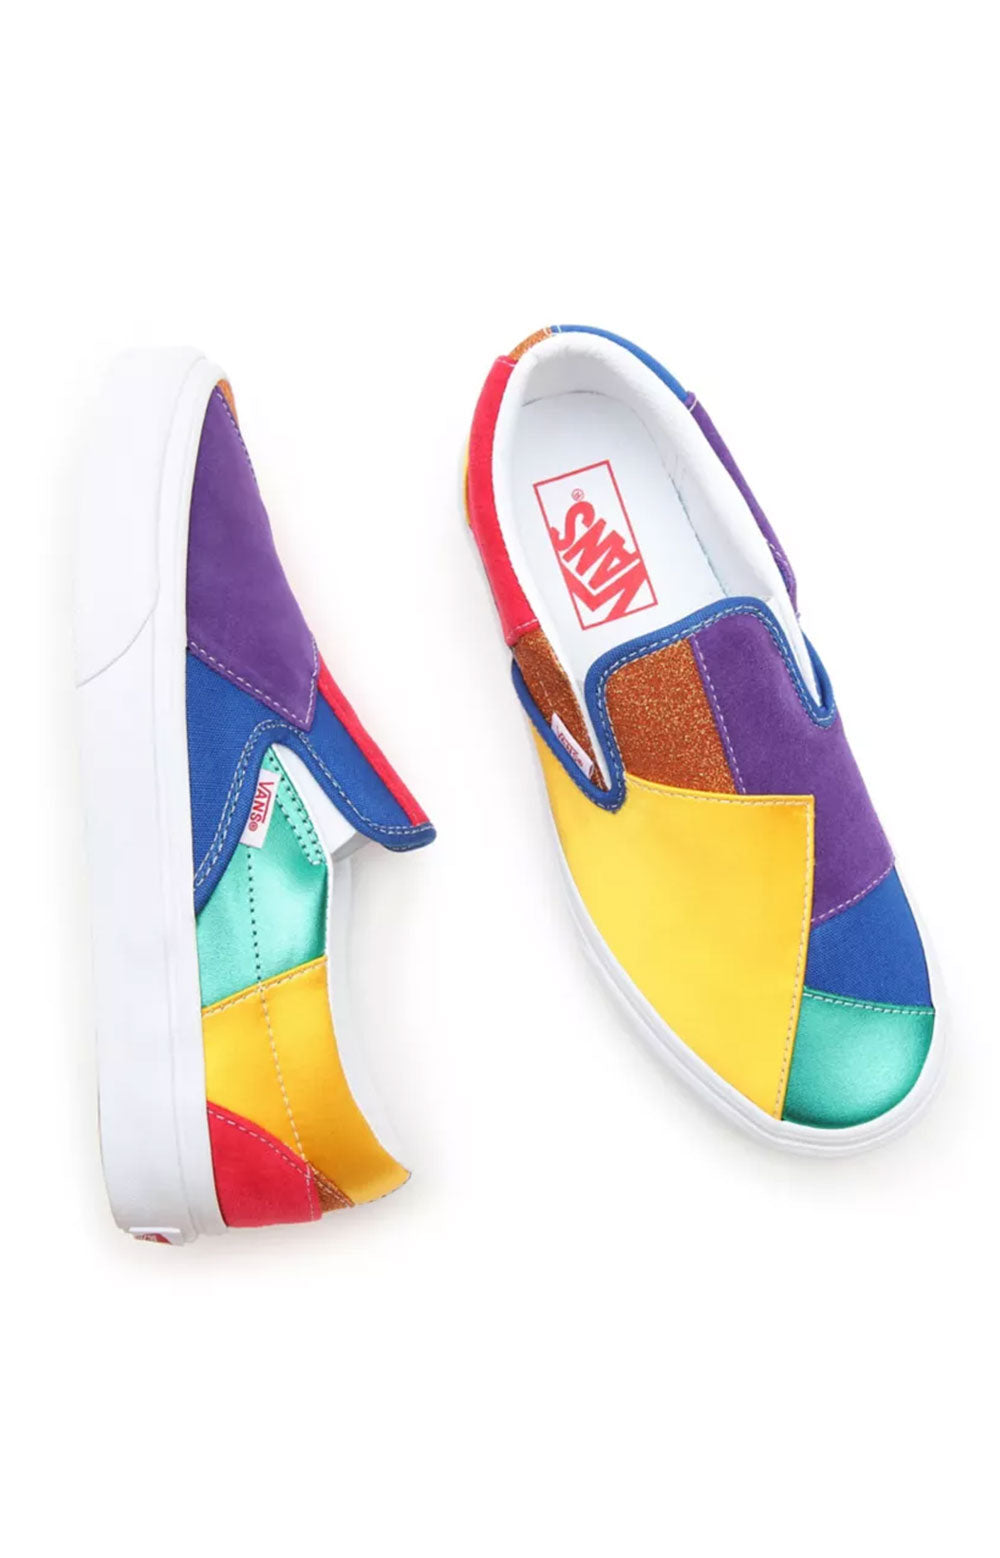 (3TB44B) Pride Classic Slip-On Shoes - Patchwork